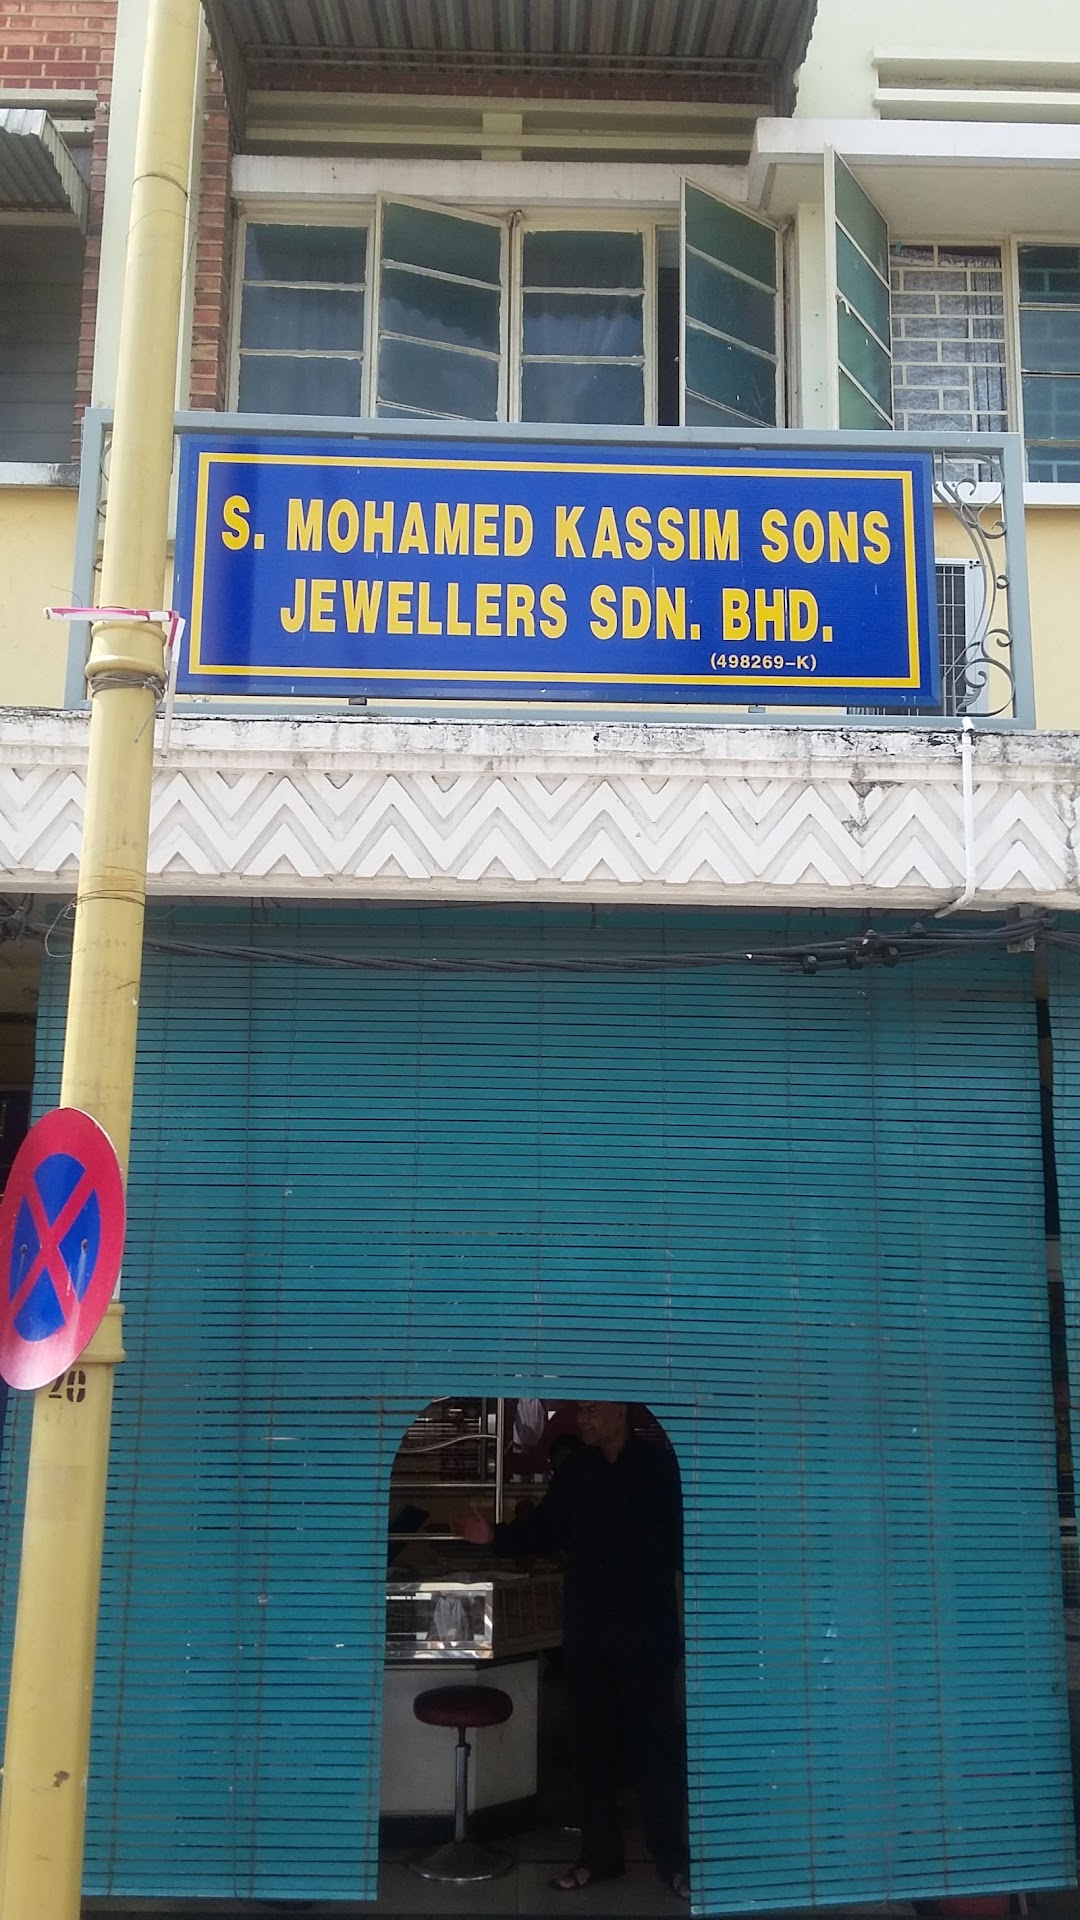 S. Mohamed Kassim Sons Jewellers Sdn. Bhd.